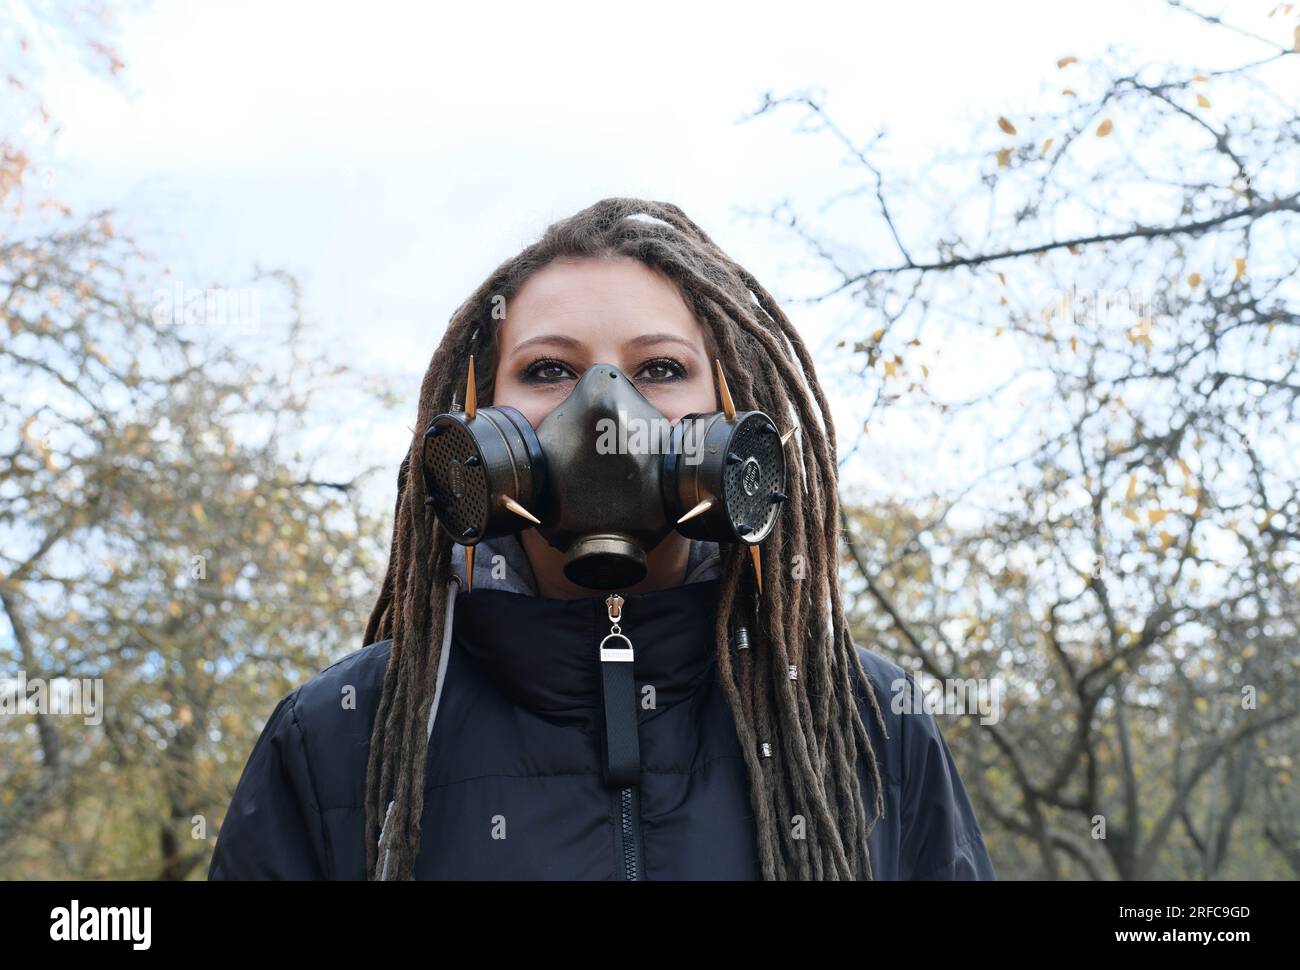 Portrait of a Woman in a black jacket with dreadlocks and a gas mask with spikes. Woman posing in autumn park. Horizontal photo Stock Photo